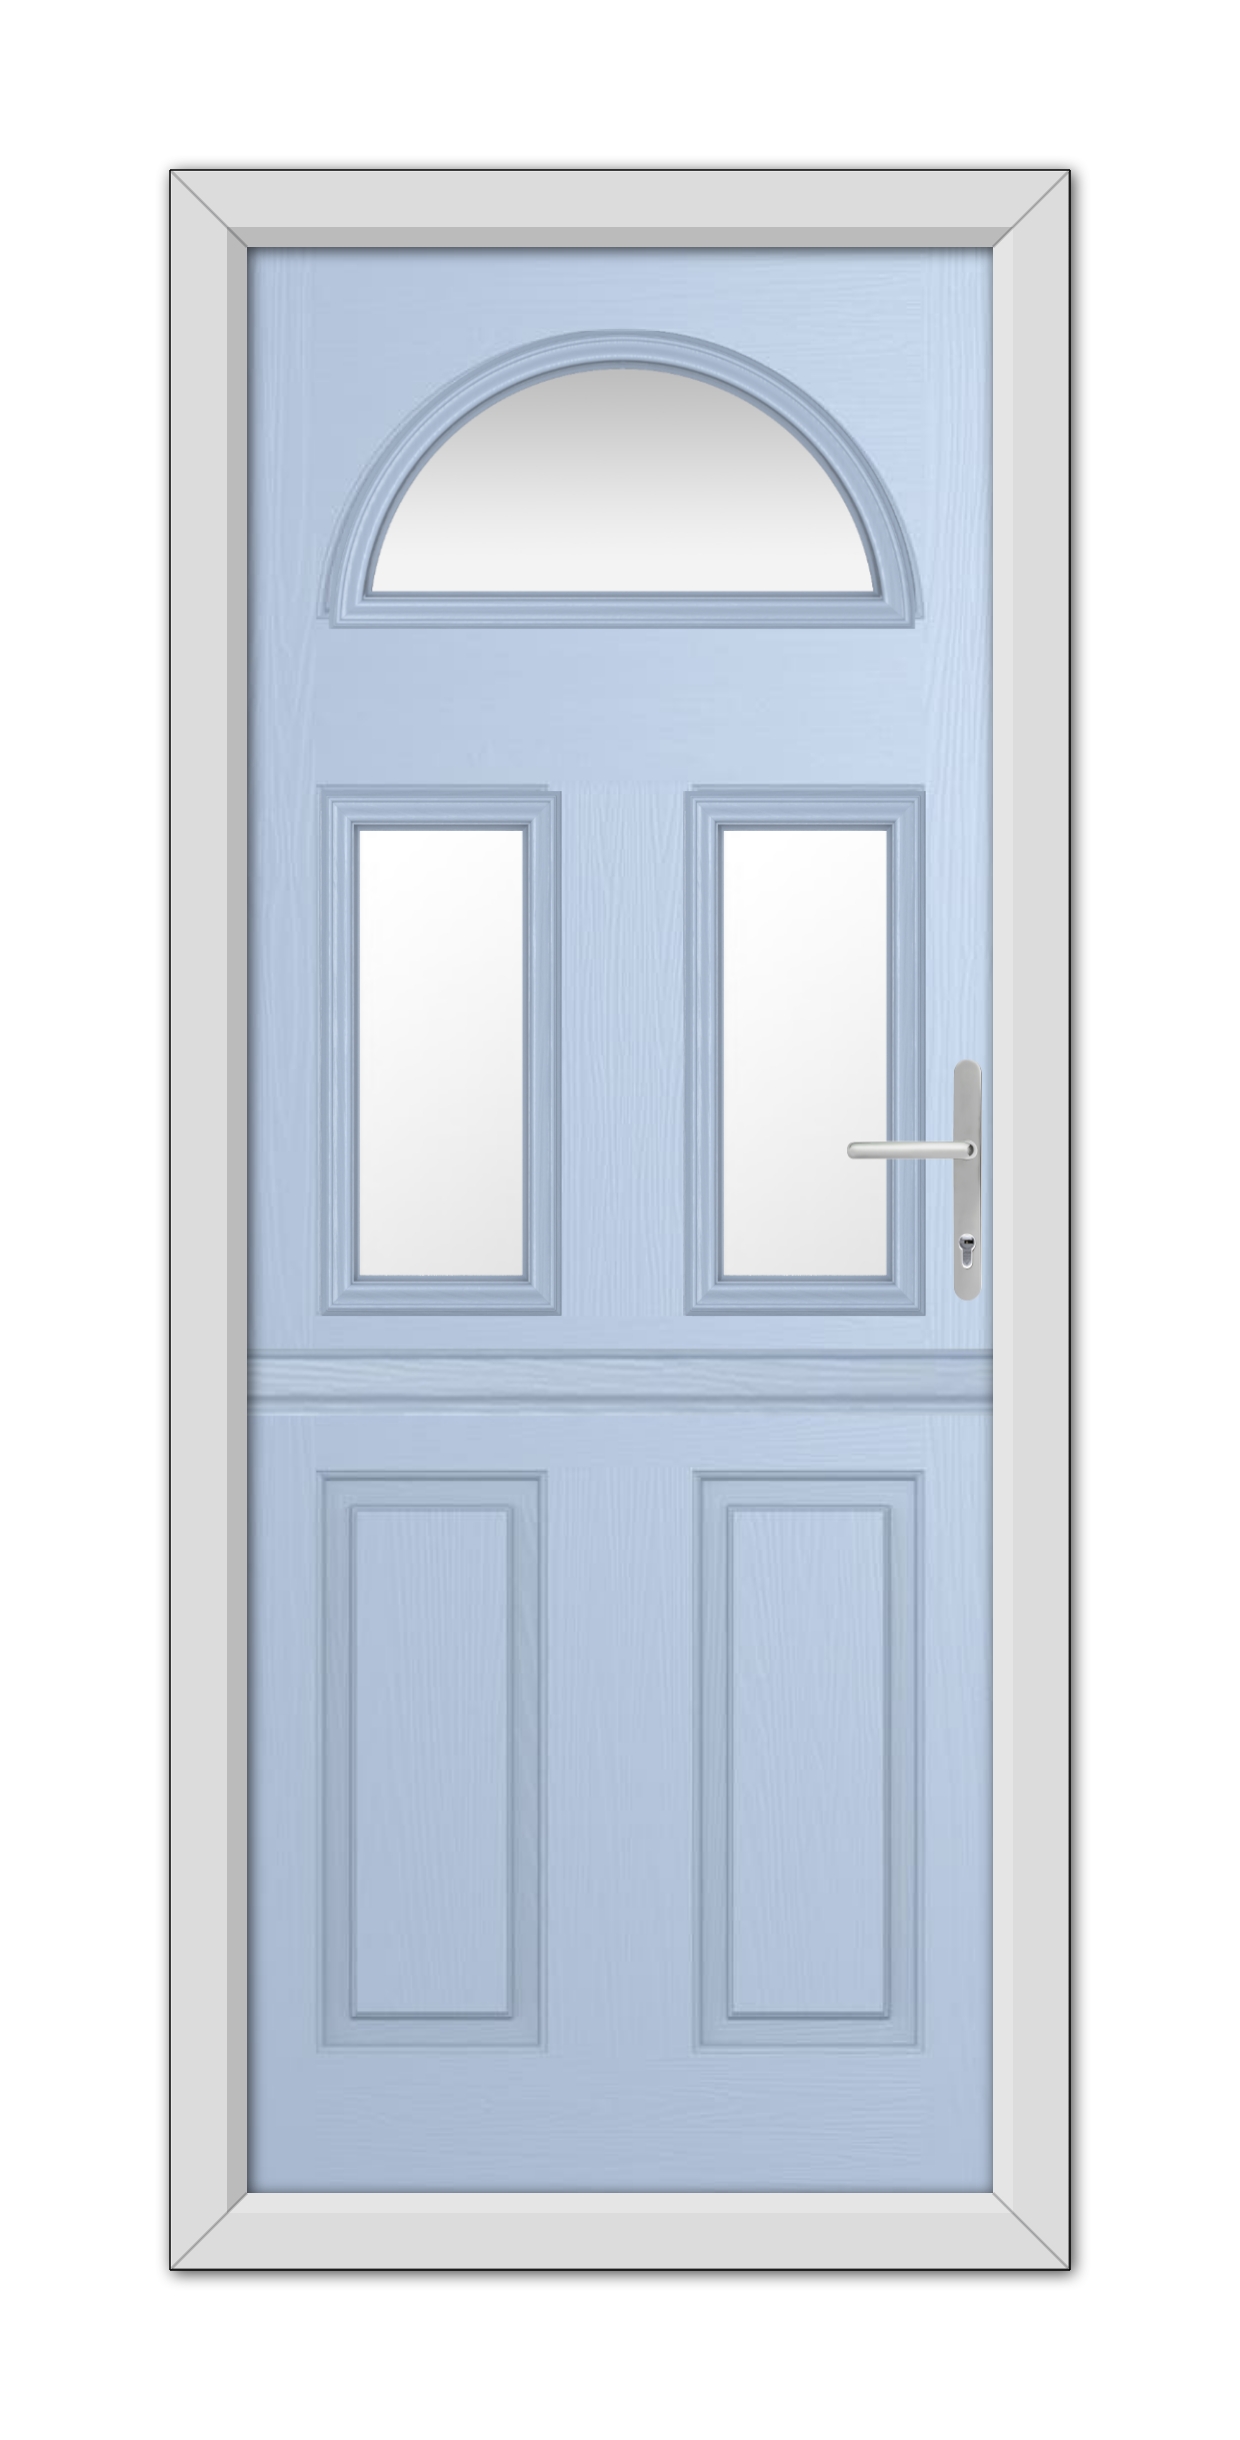 Duck Egg Blue Winslow 3 Stable Composite Door with an arched window at the top, two square windows in the middle, and a silver handle on the right side.